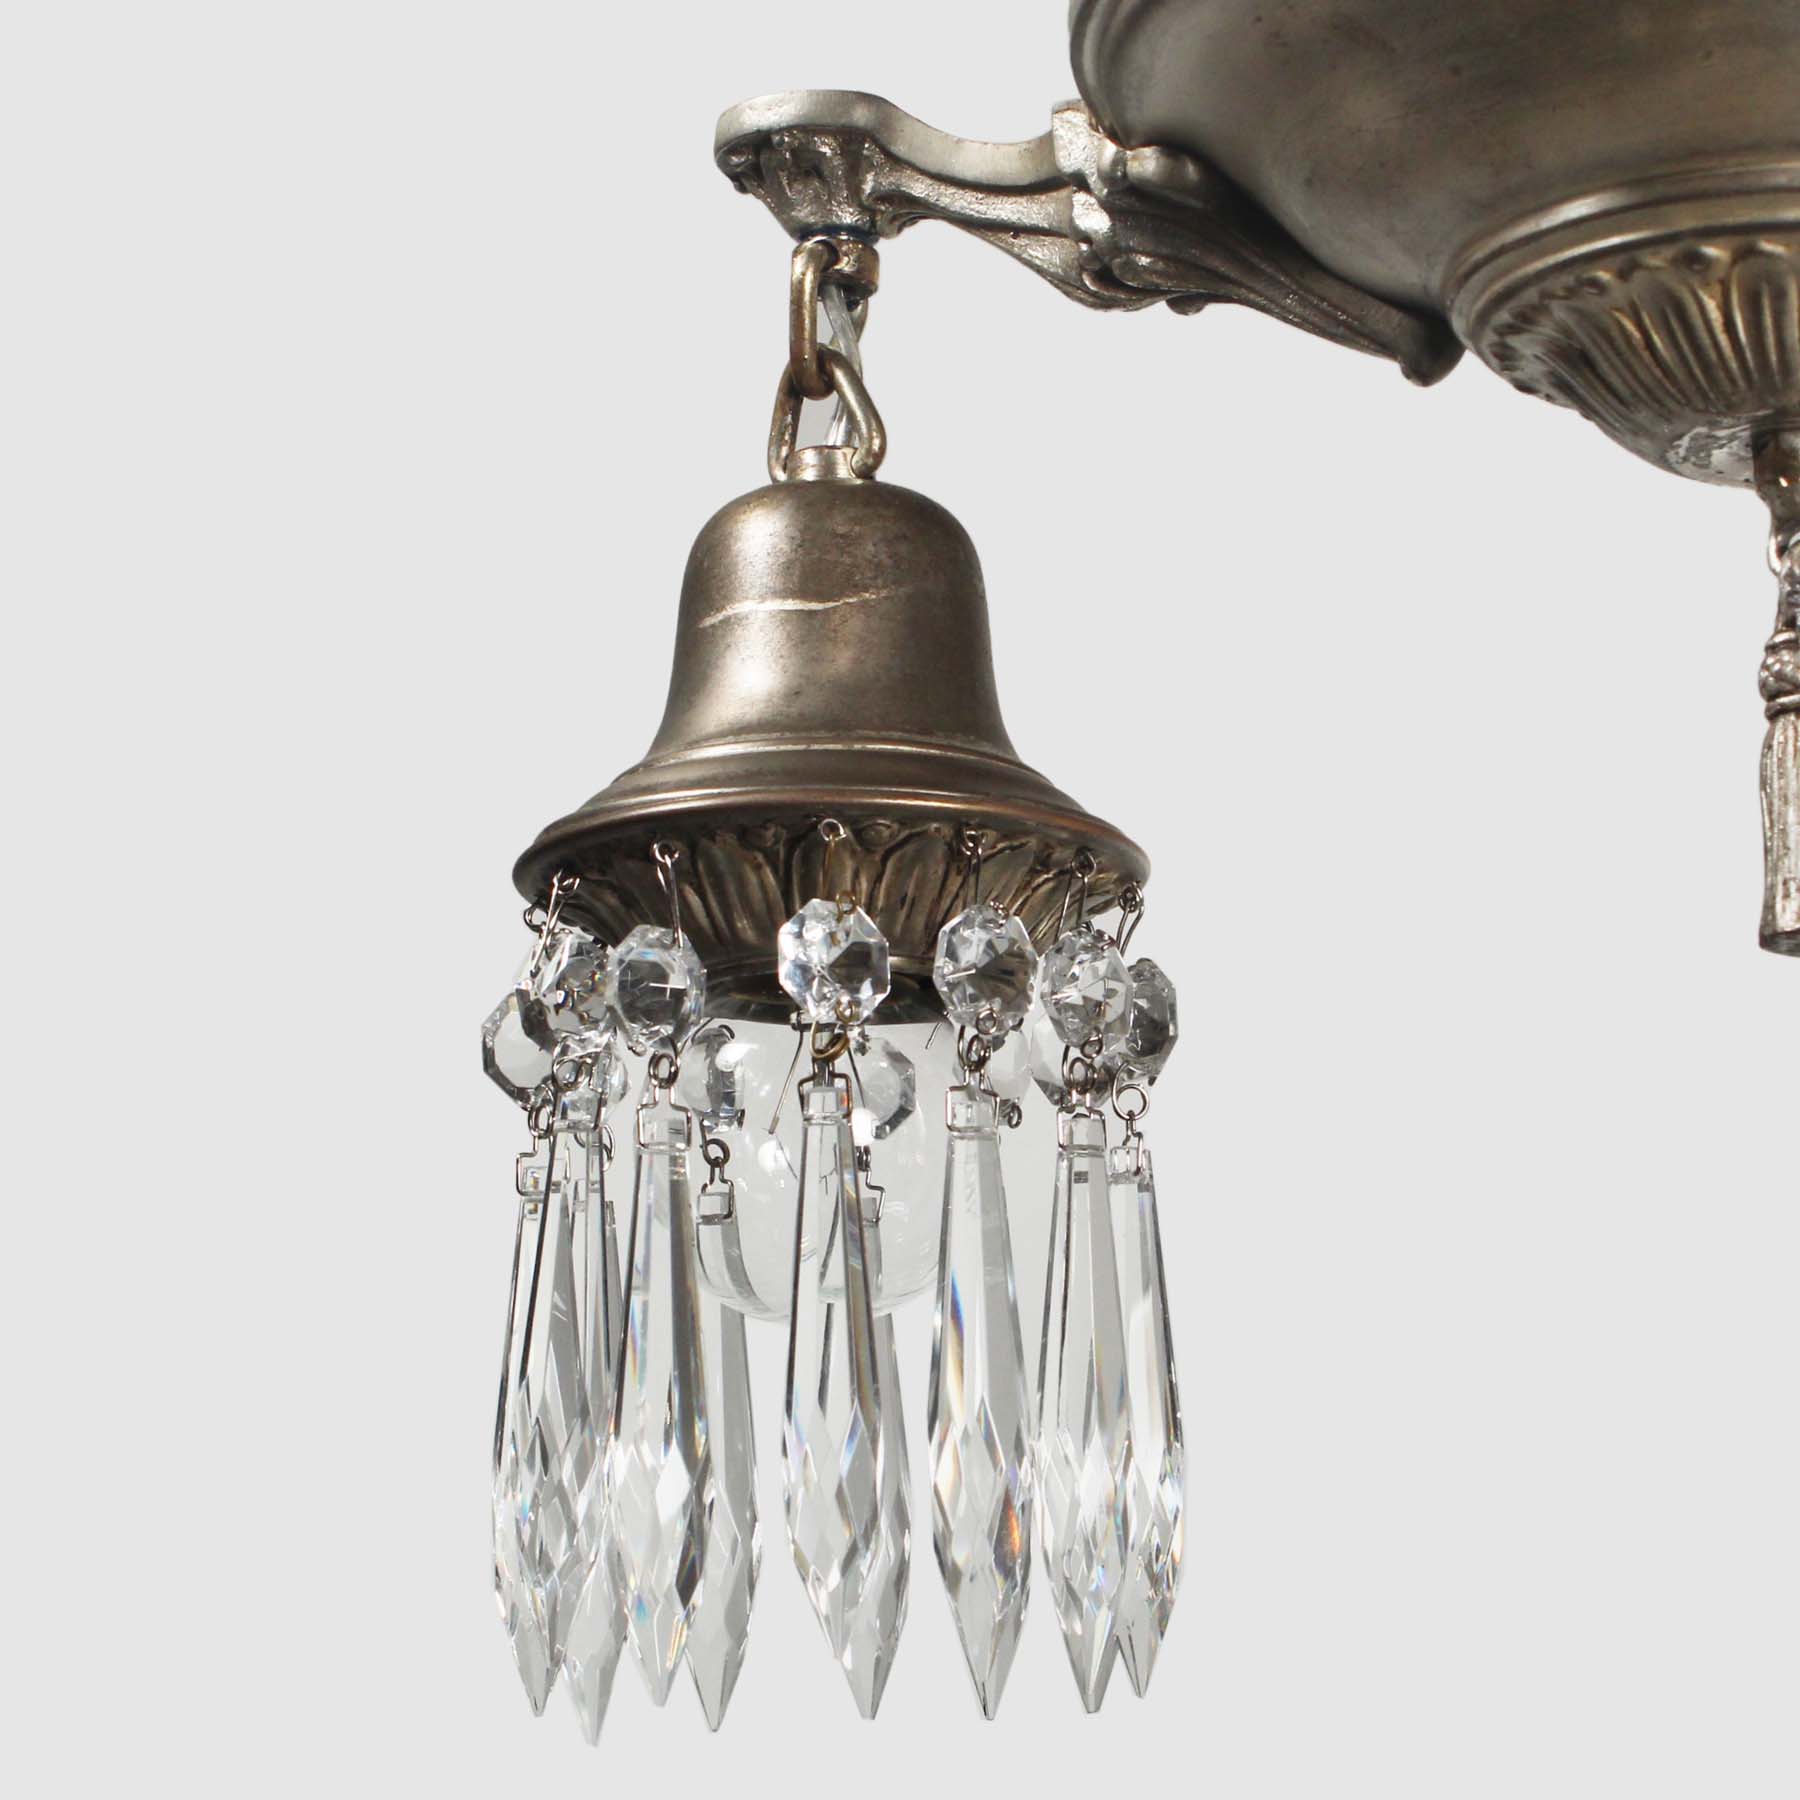 SOLD Neoclassical Silver Plated Chandelier with Prisms, Antique Lighting-67715